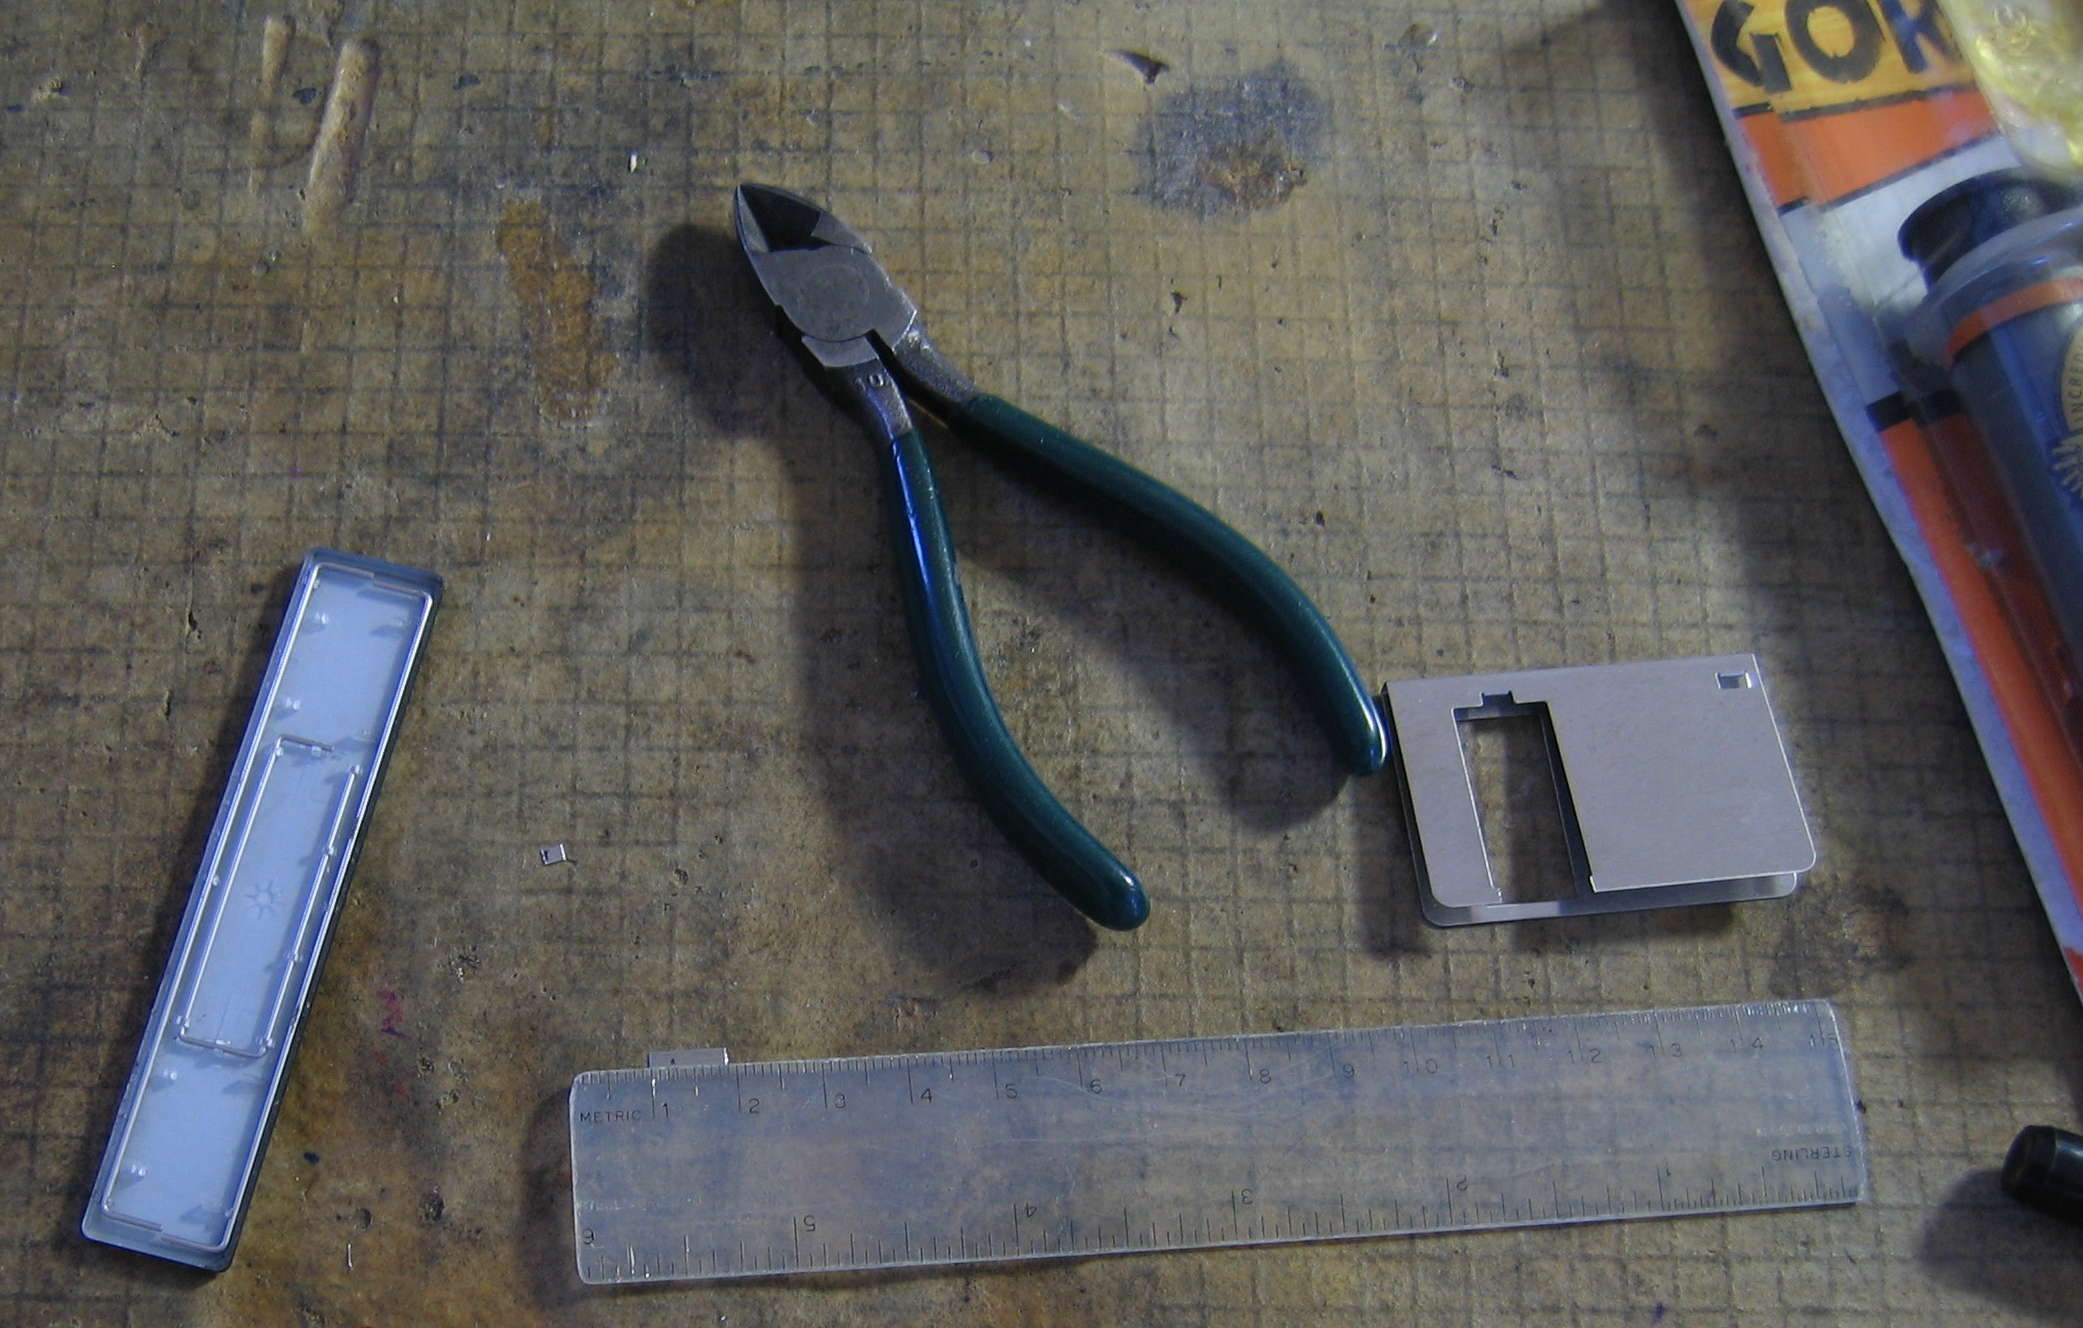 Approx. 2 mm square metal pieces cut by diagonal cutters from floppy disk shutter, one piece against ruler edge